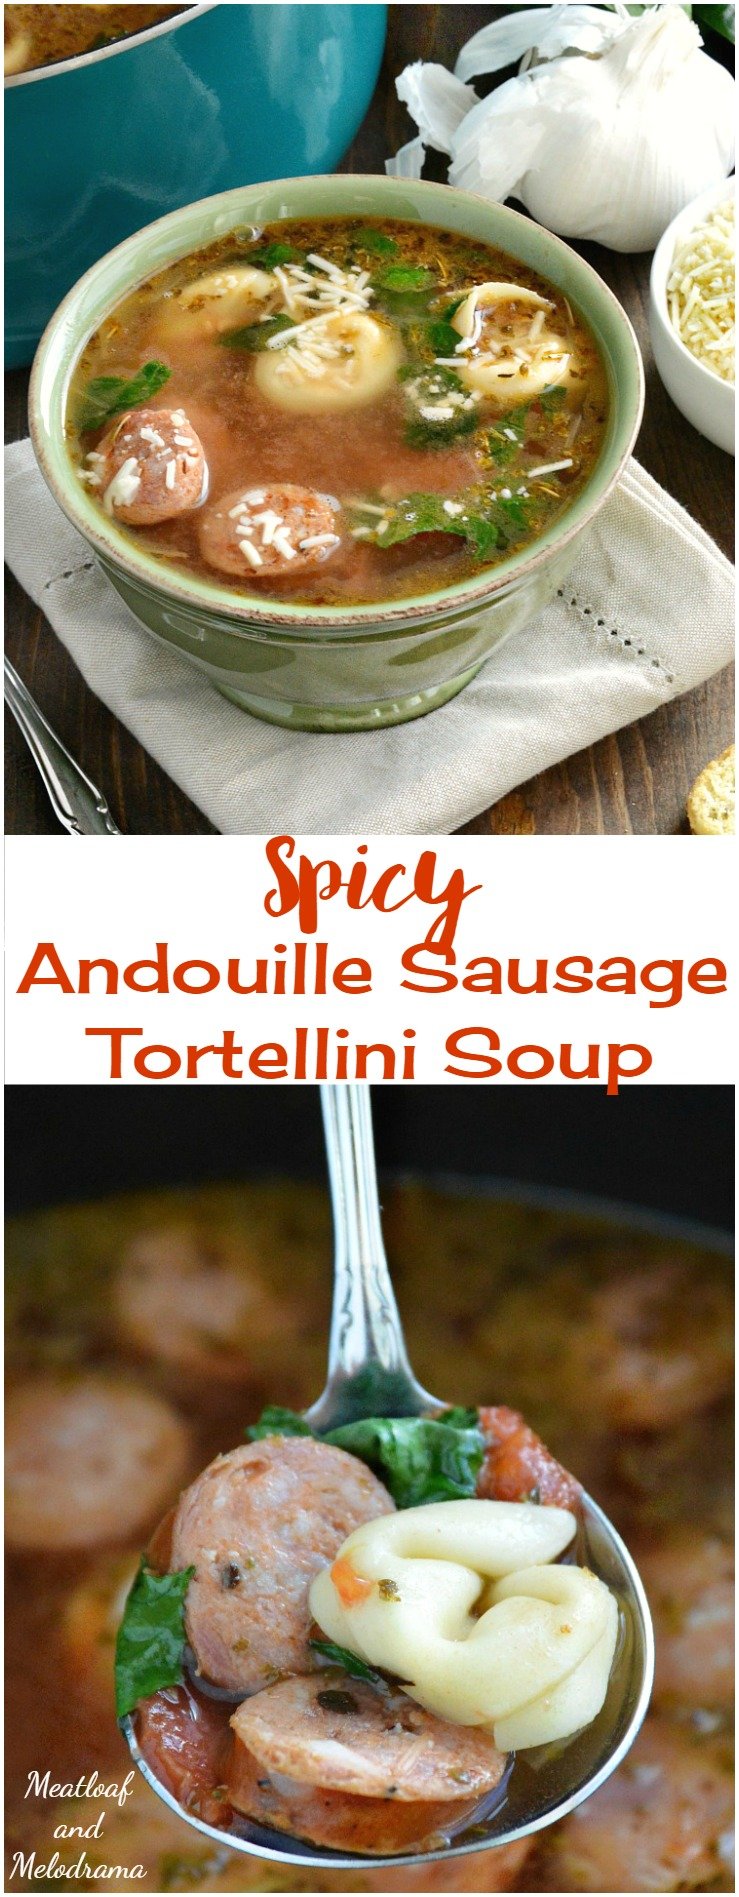 Spicy Andouille Sausage Tortellini Soup